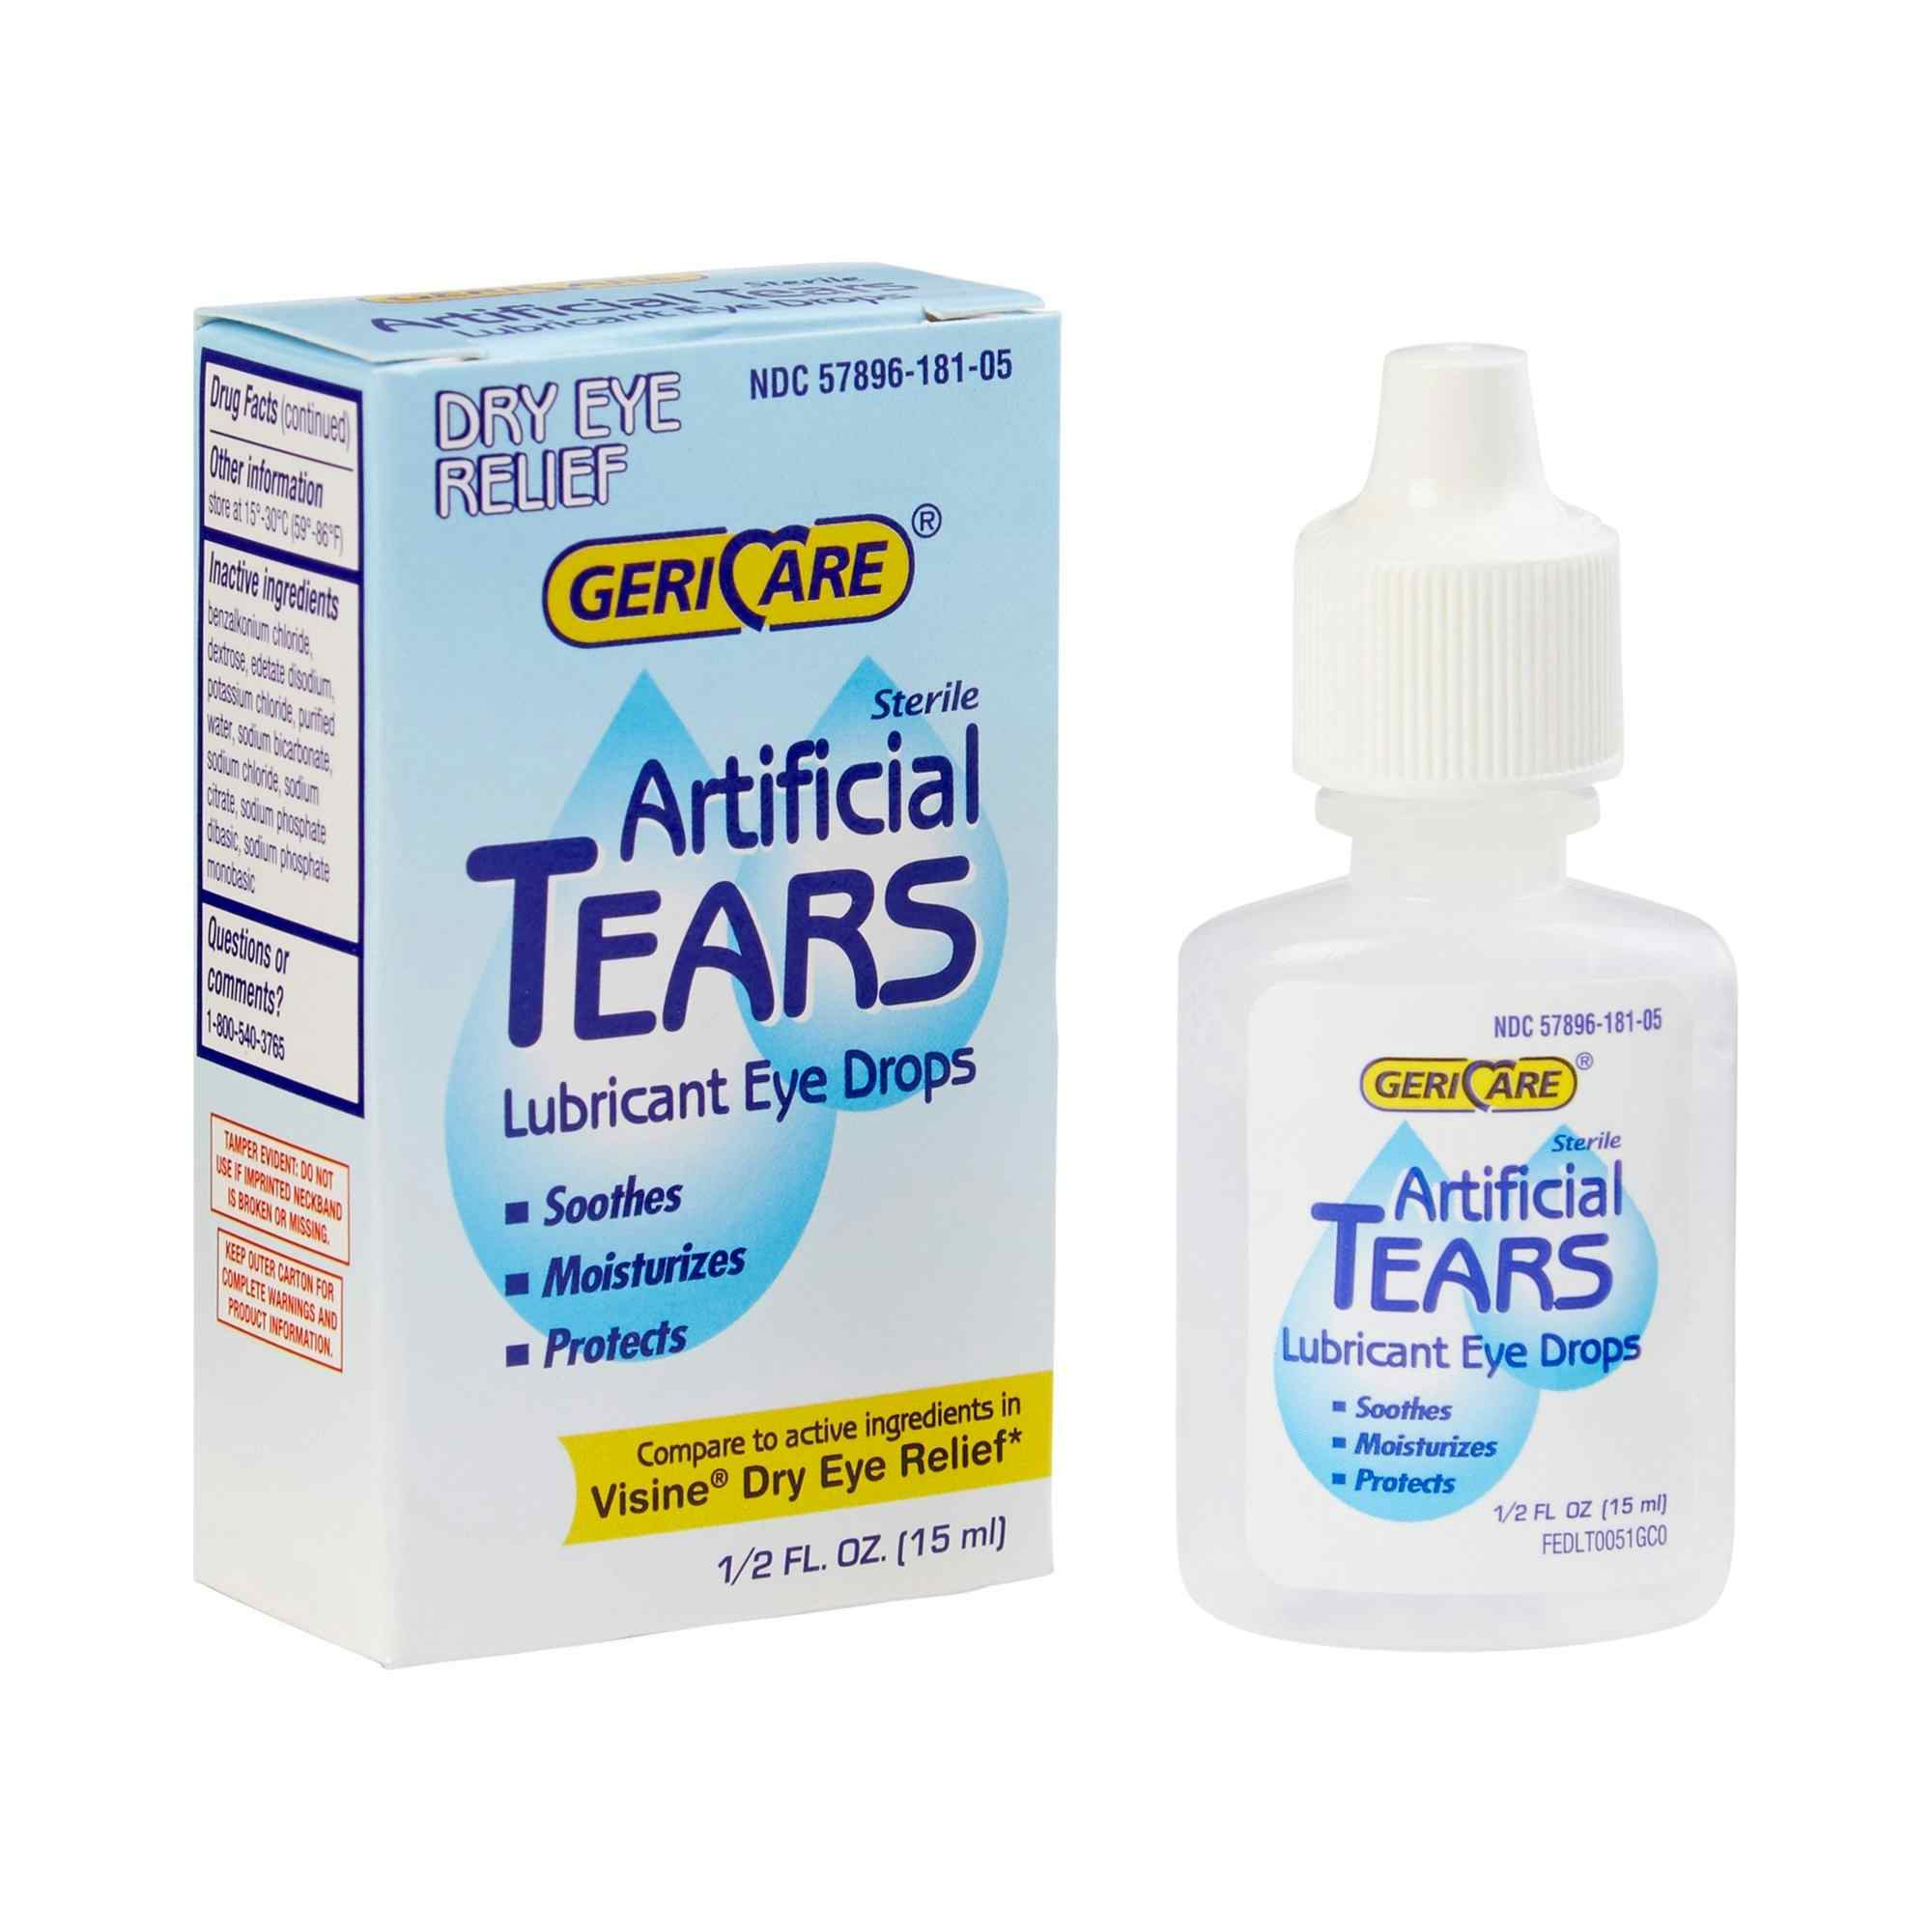 GeriCare Artificial Tears Sterile Lubricant Eye Drops, 0.5 oz. Carewell